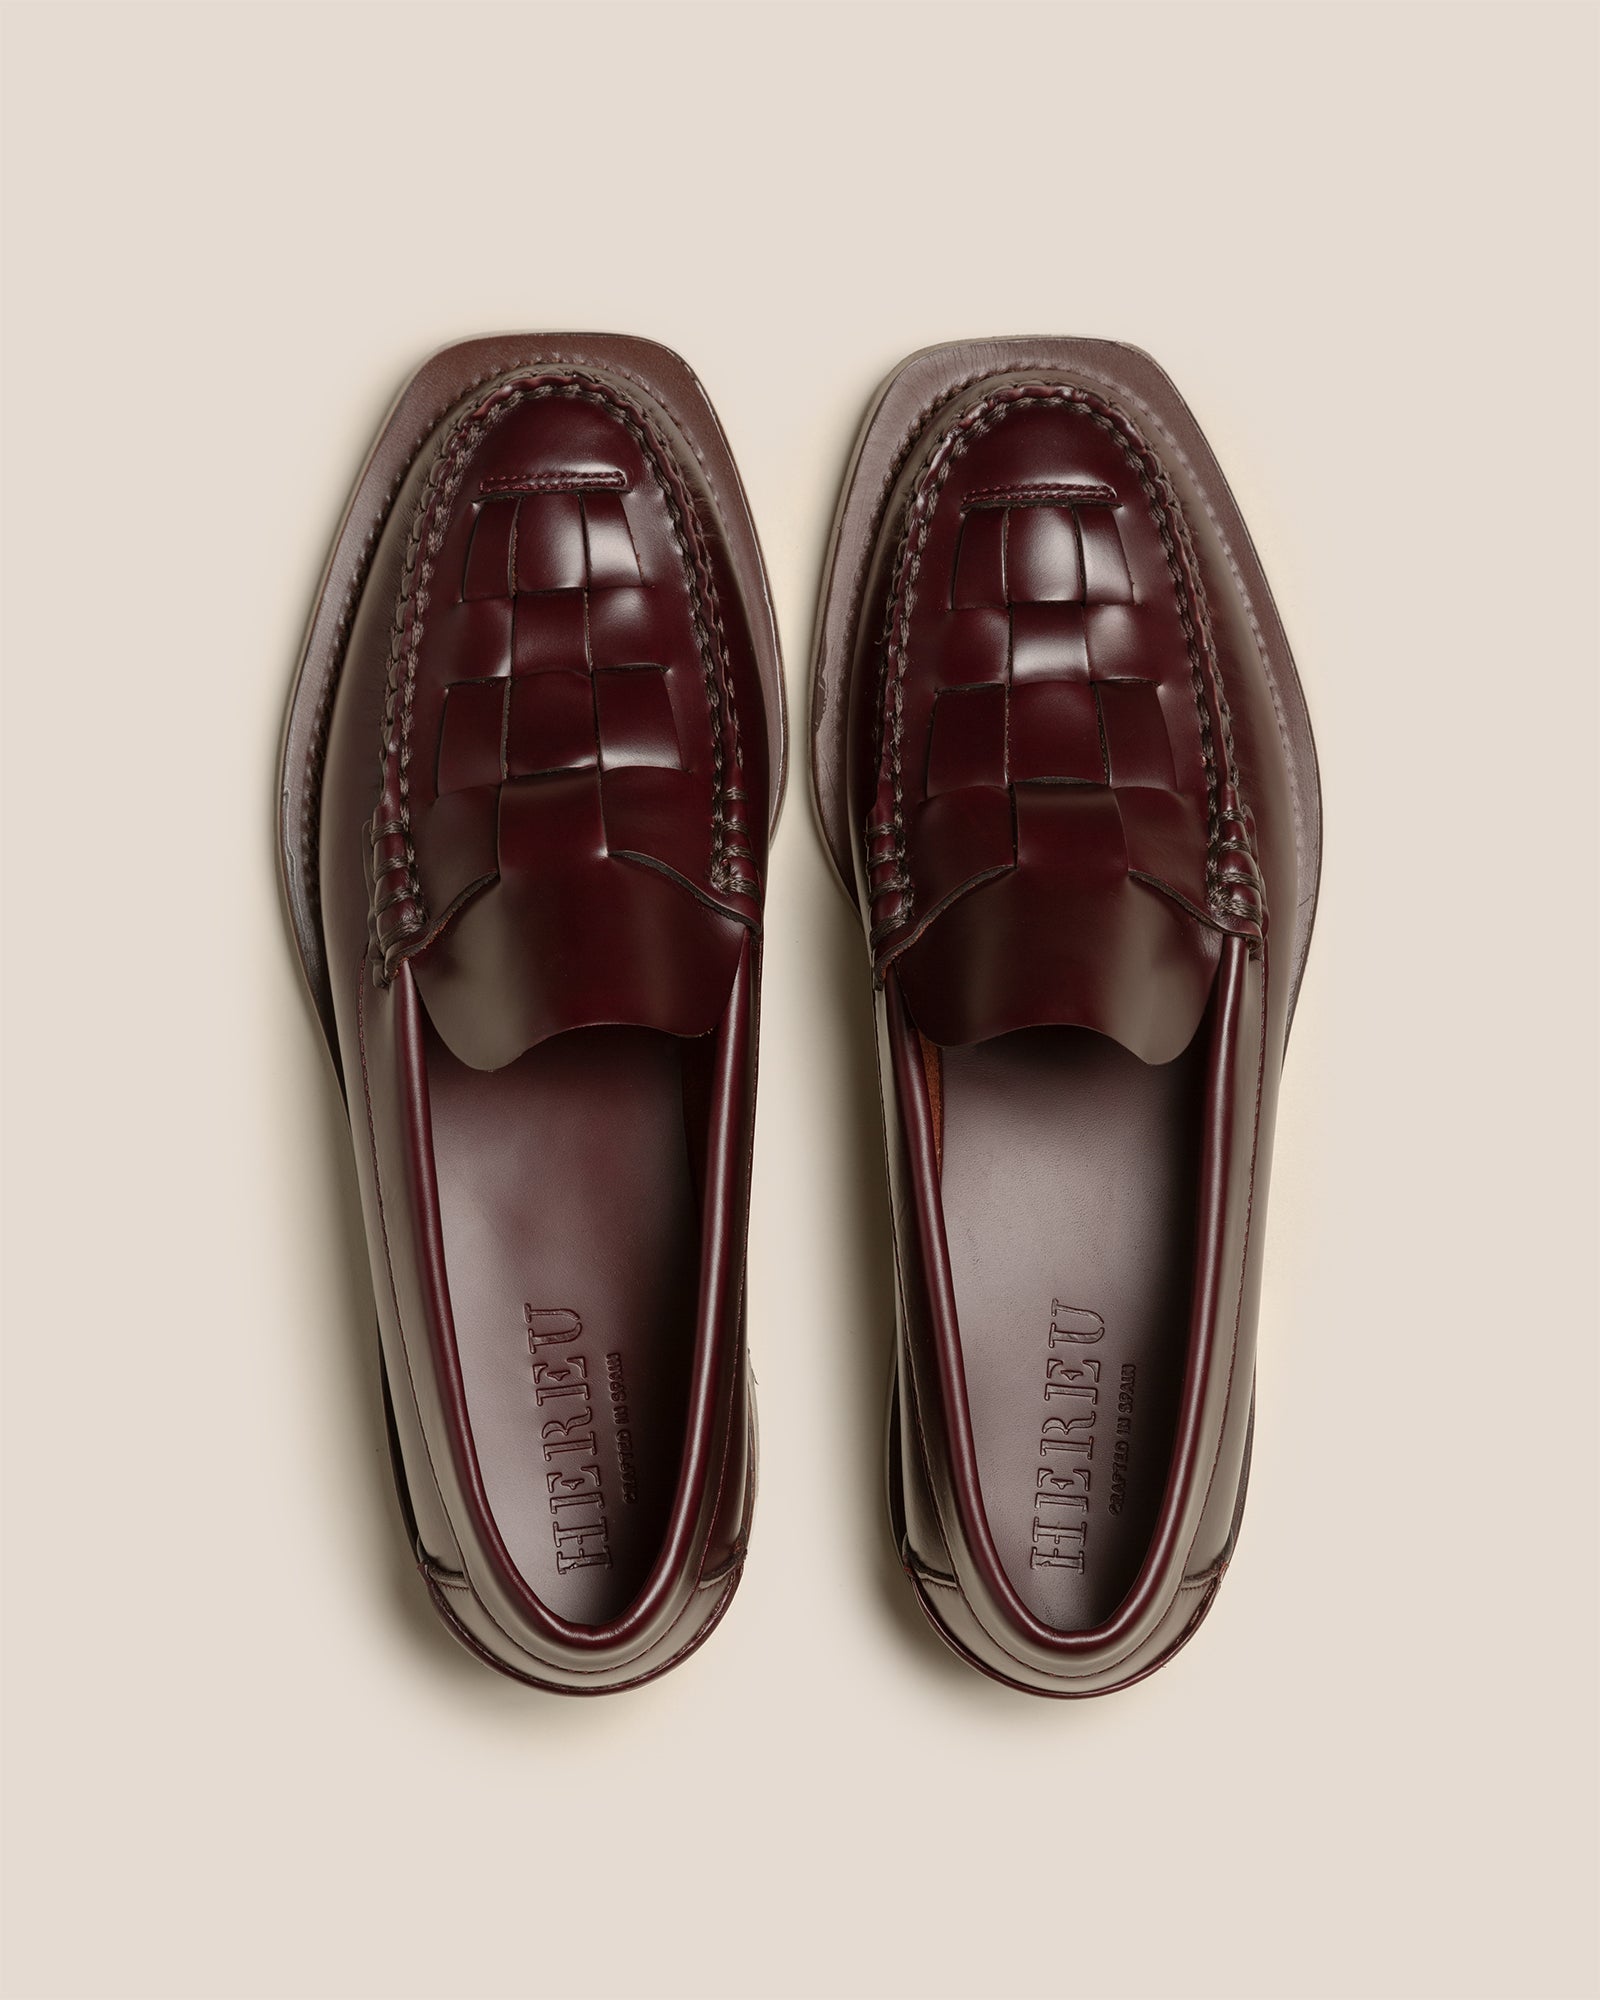 Name: The Noe Classic Burgundy Tassel Loafer Collection: Fall